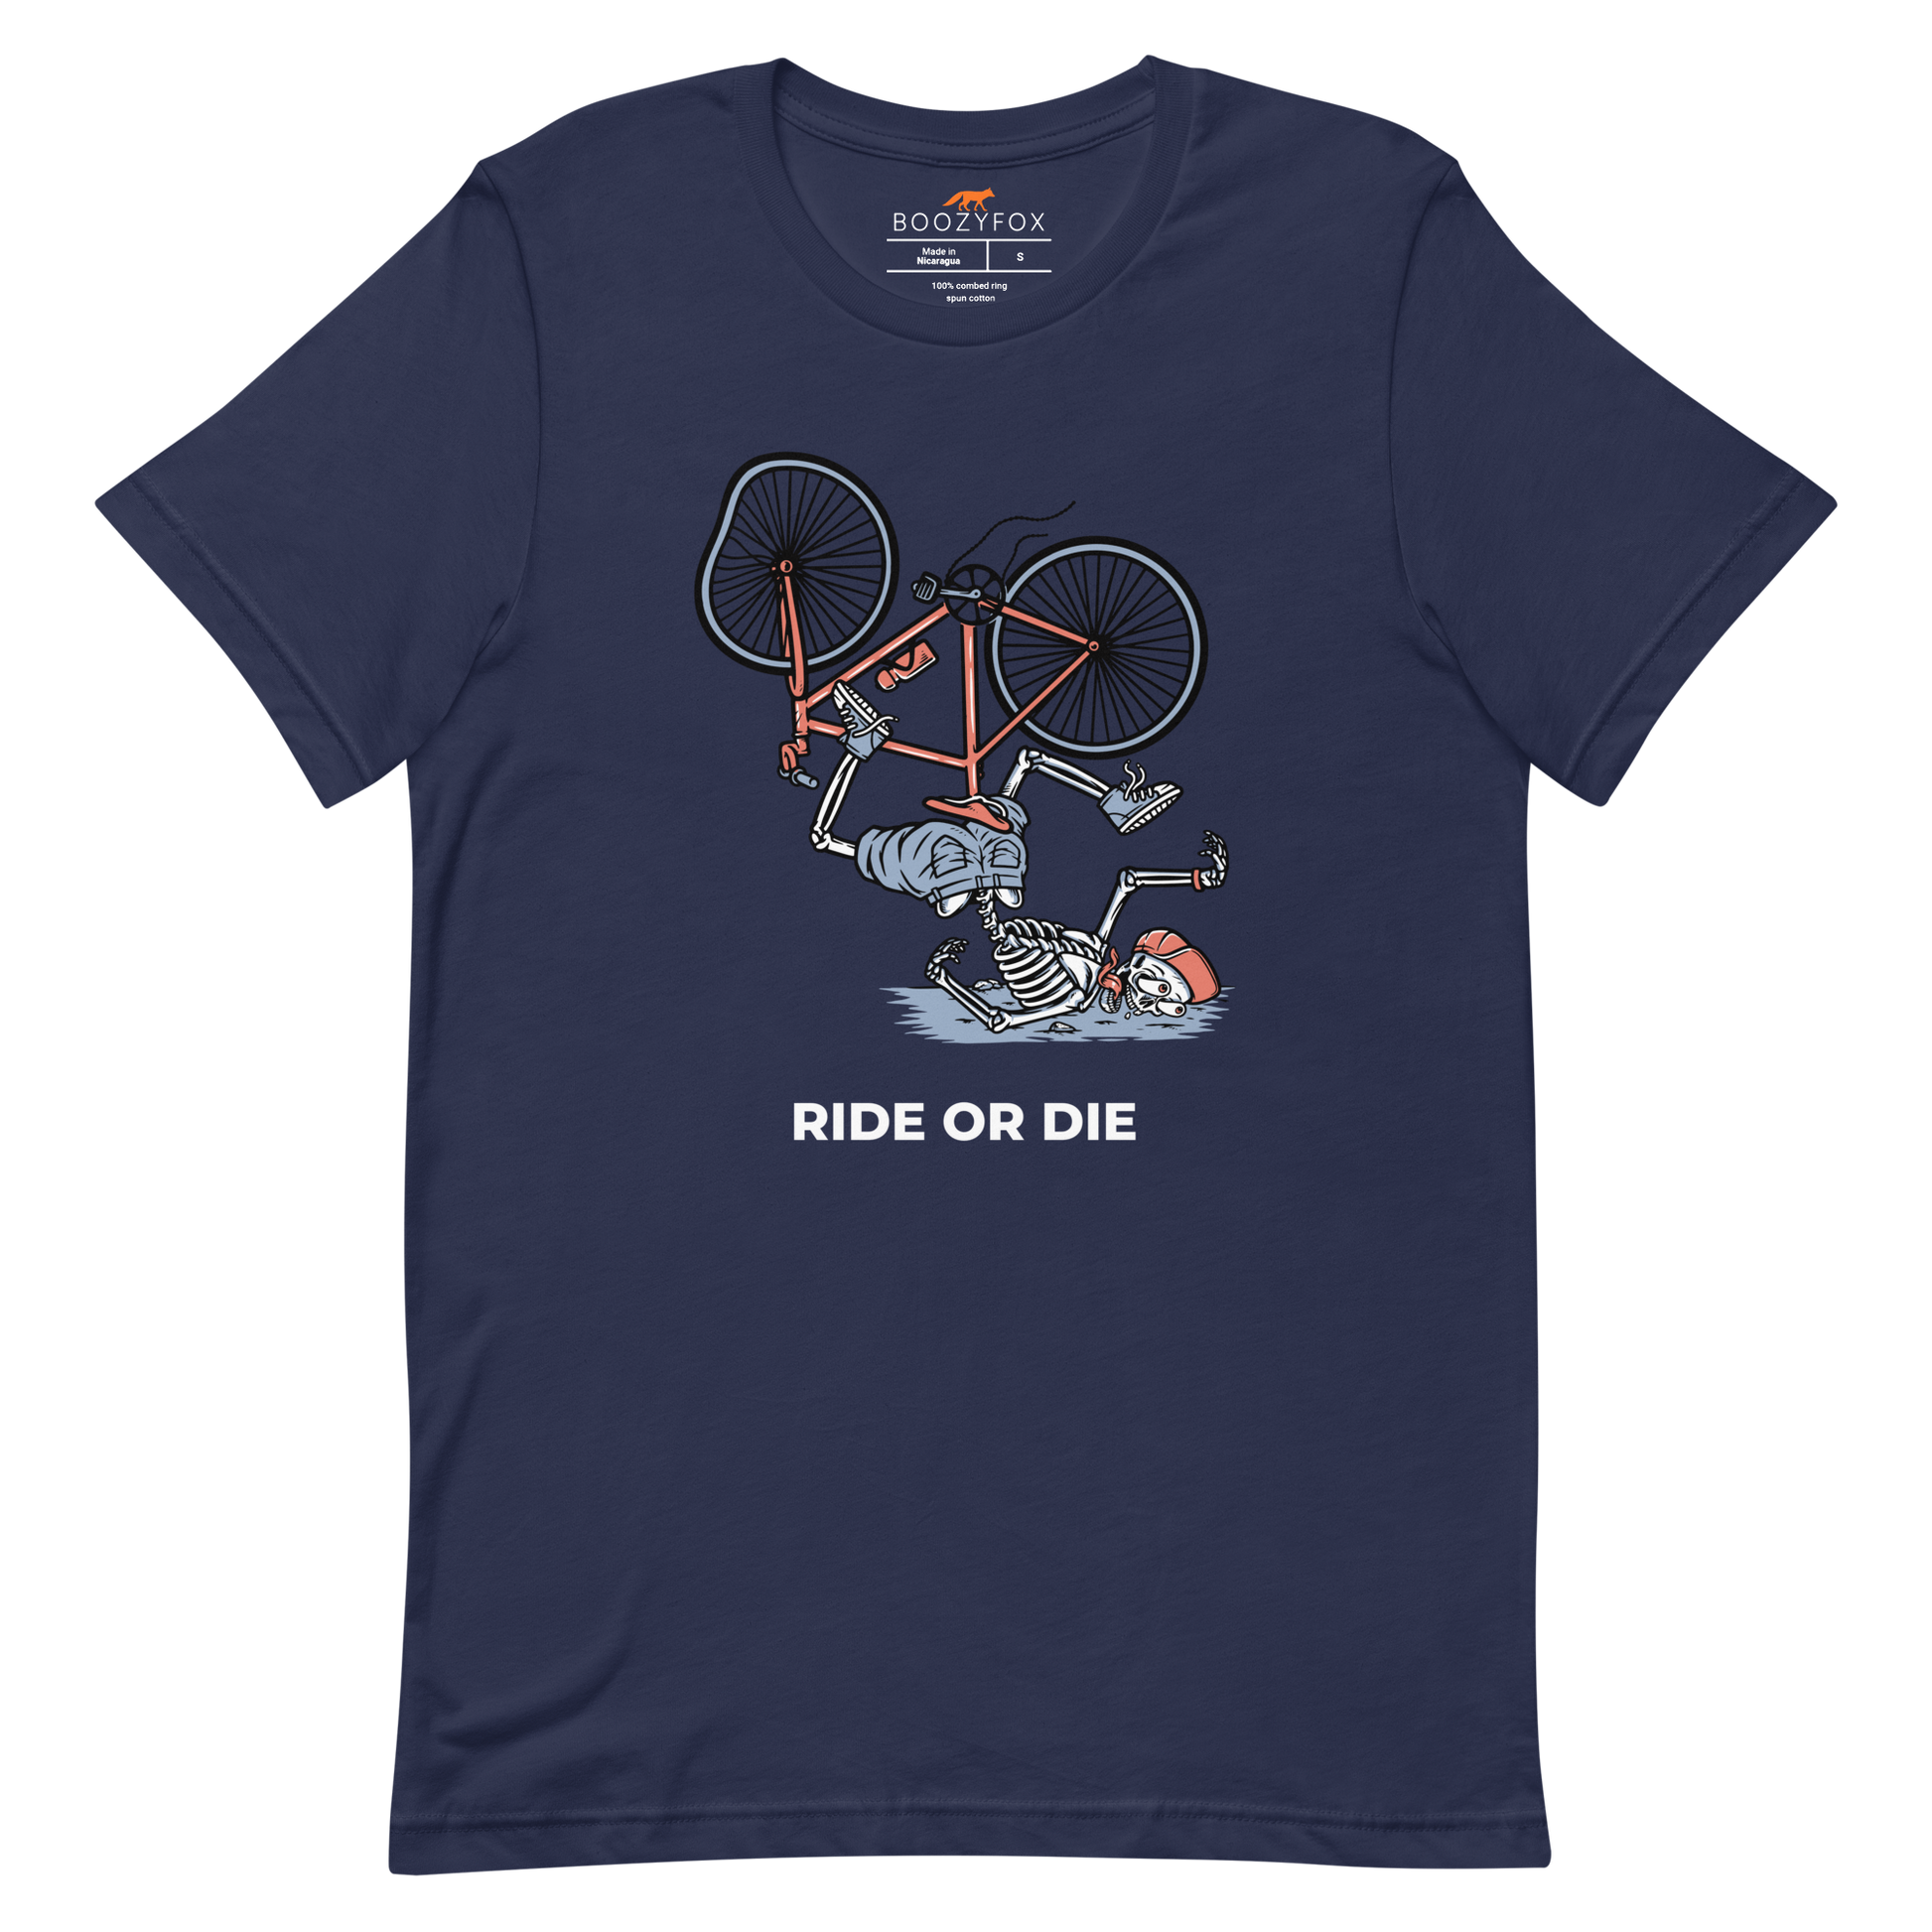 Navy Premium Ride or Die Tee featuring a bold Skeleton Falling While Riding a Bicycle graphic on the chest - Funny Graphic Skeleton Tees - Boozy Fox